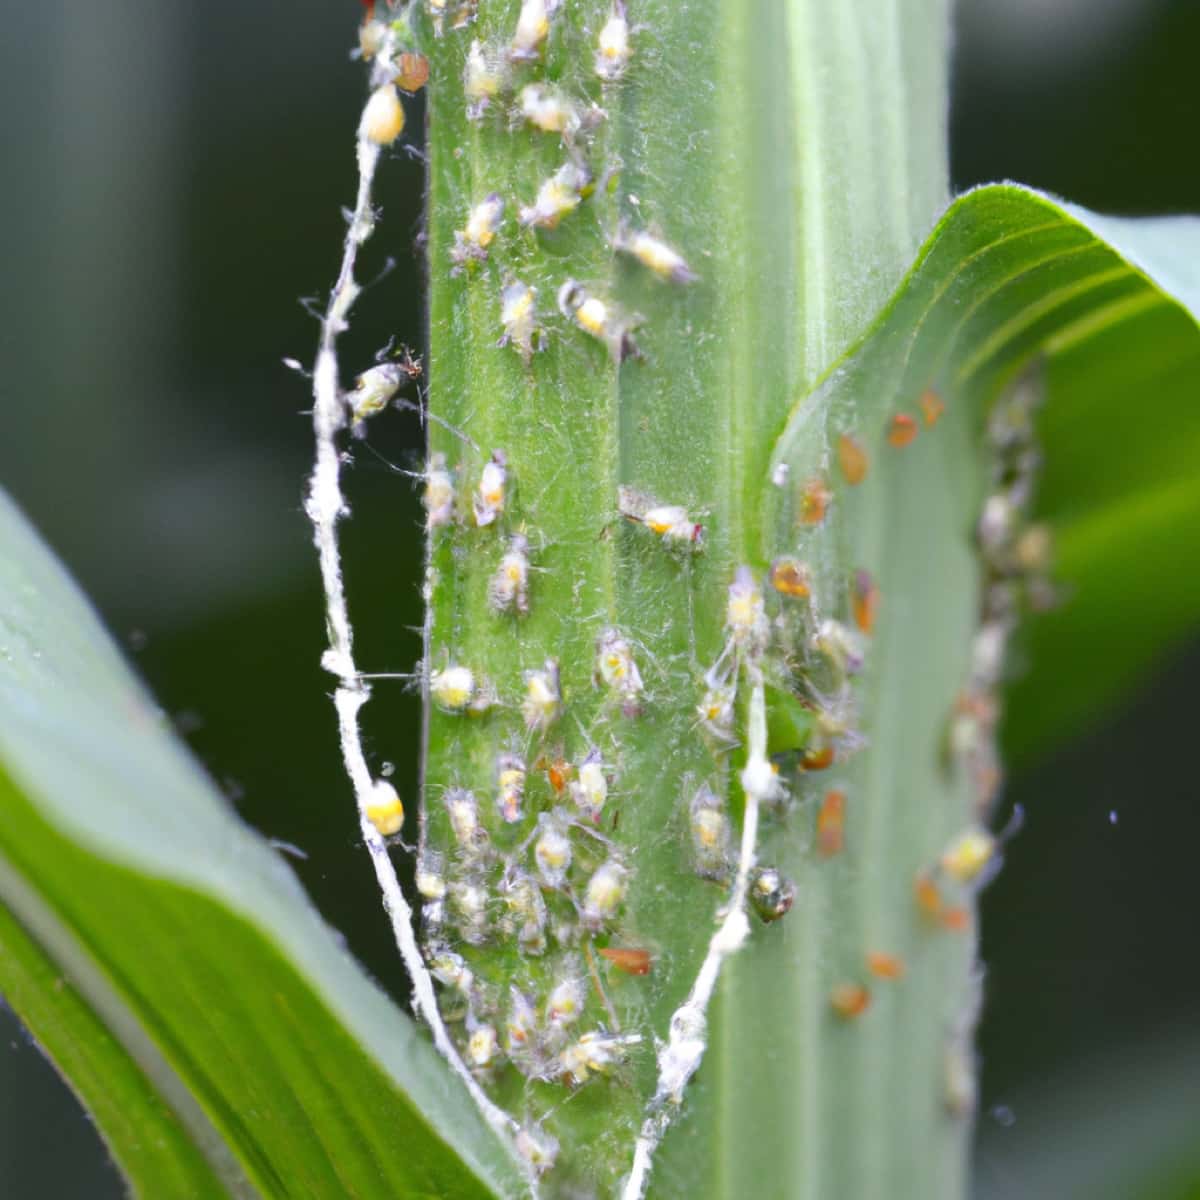 Aphids on Maize